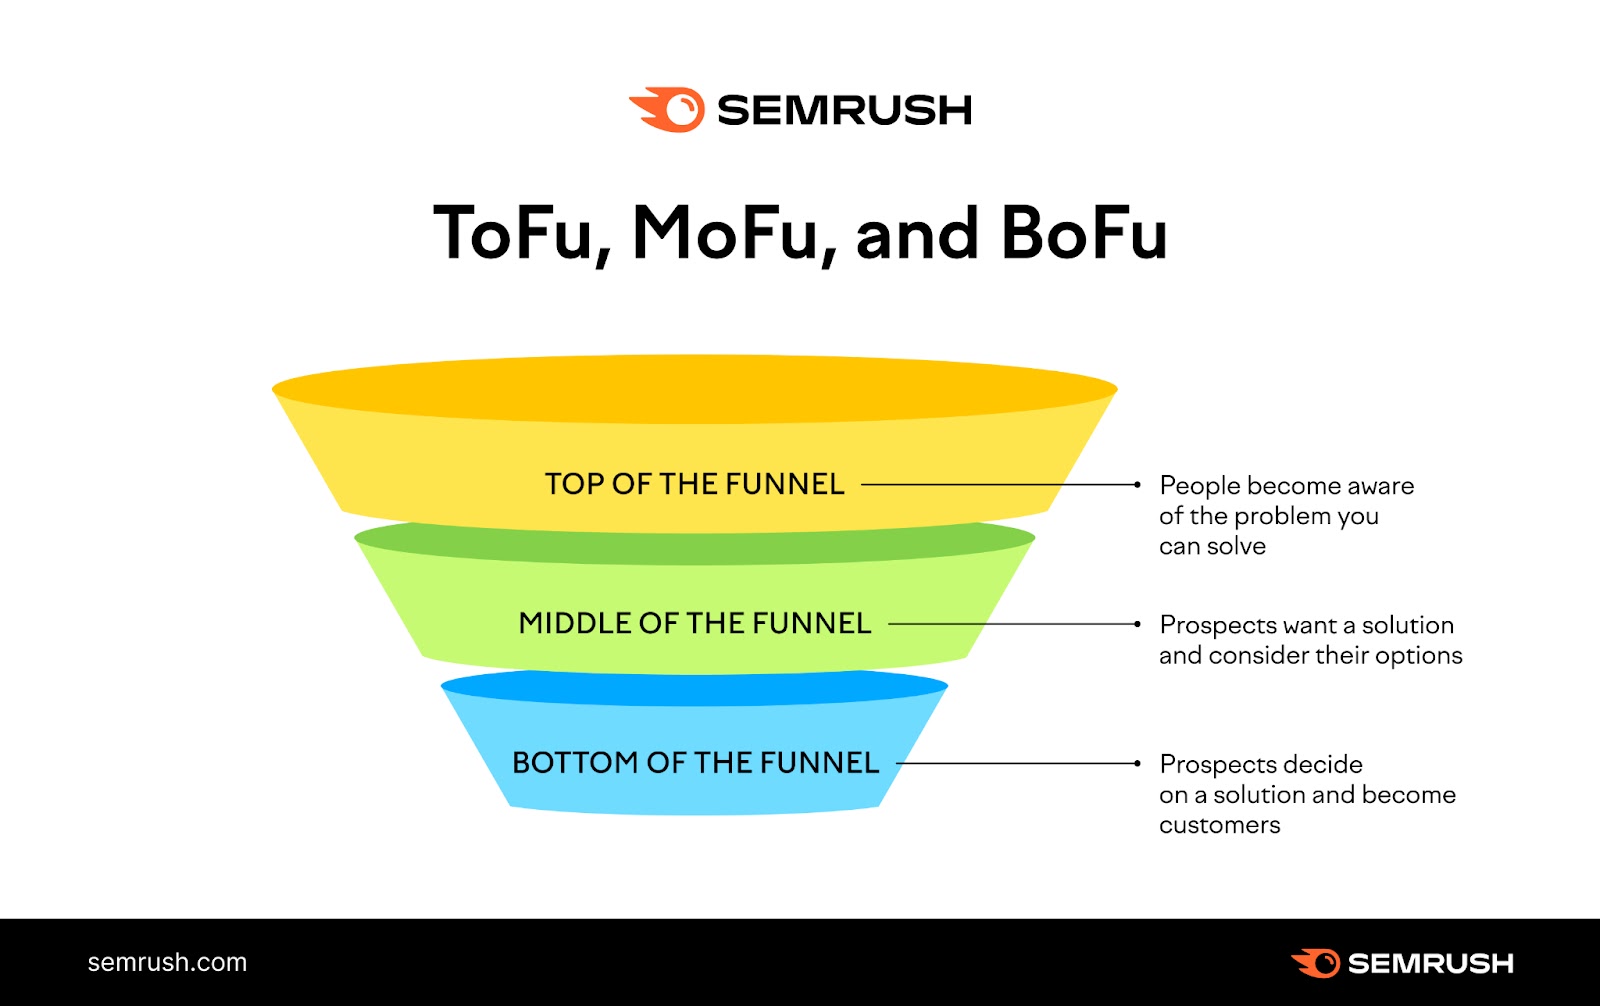 An infographic showing marketing funnel, with "ToFu" "MoFu" and "BoFu" sections explained